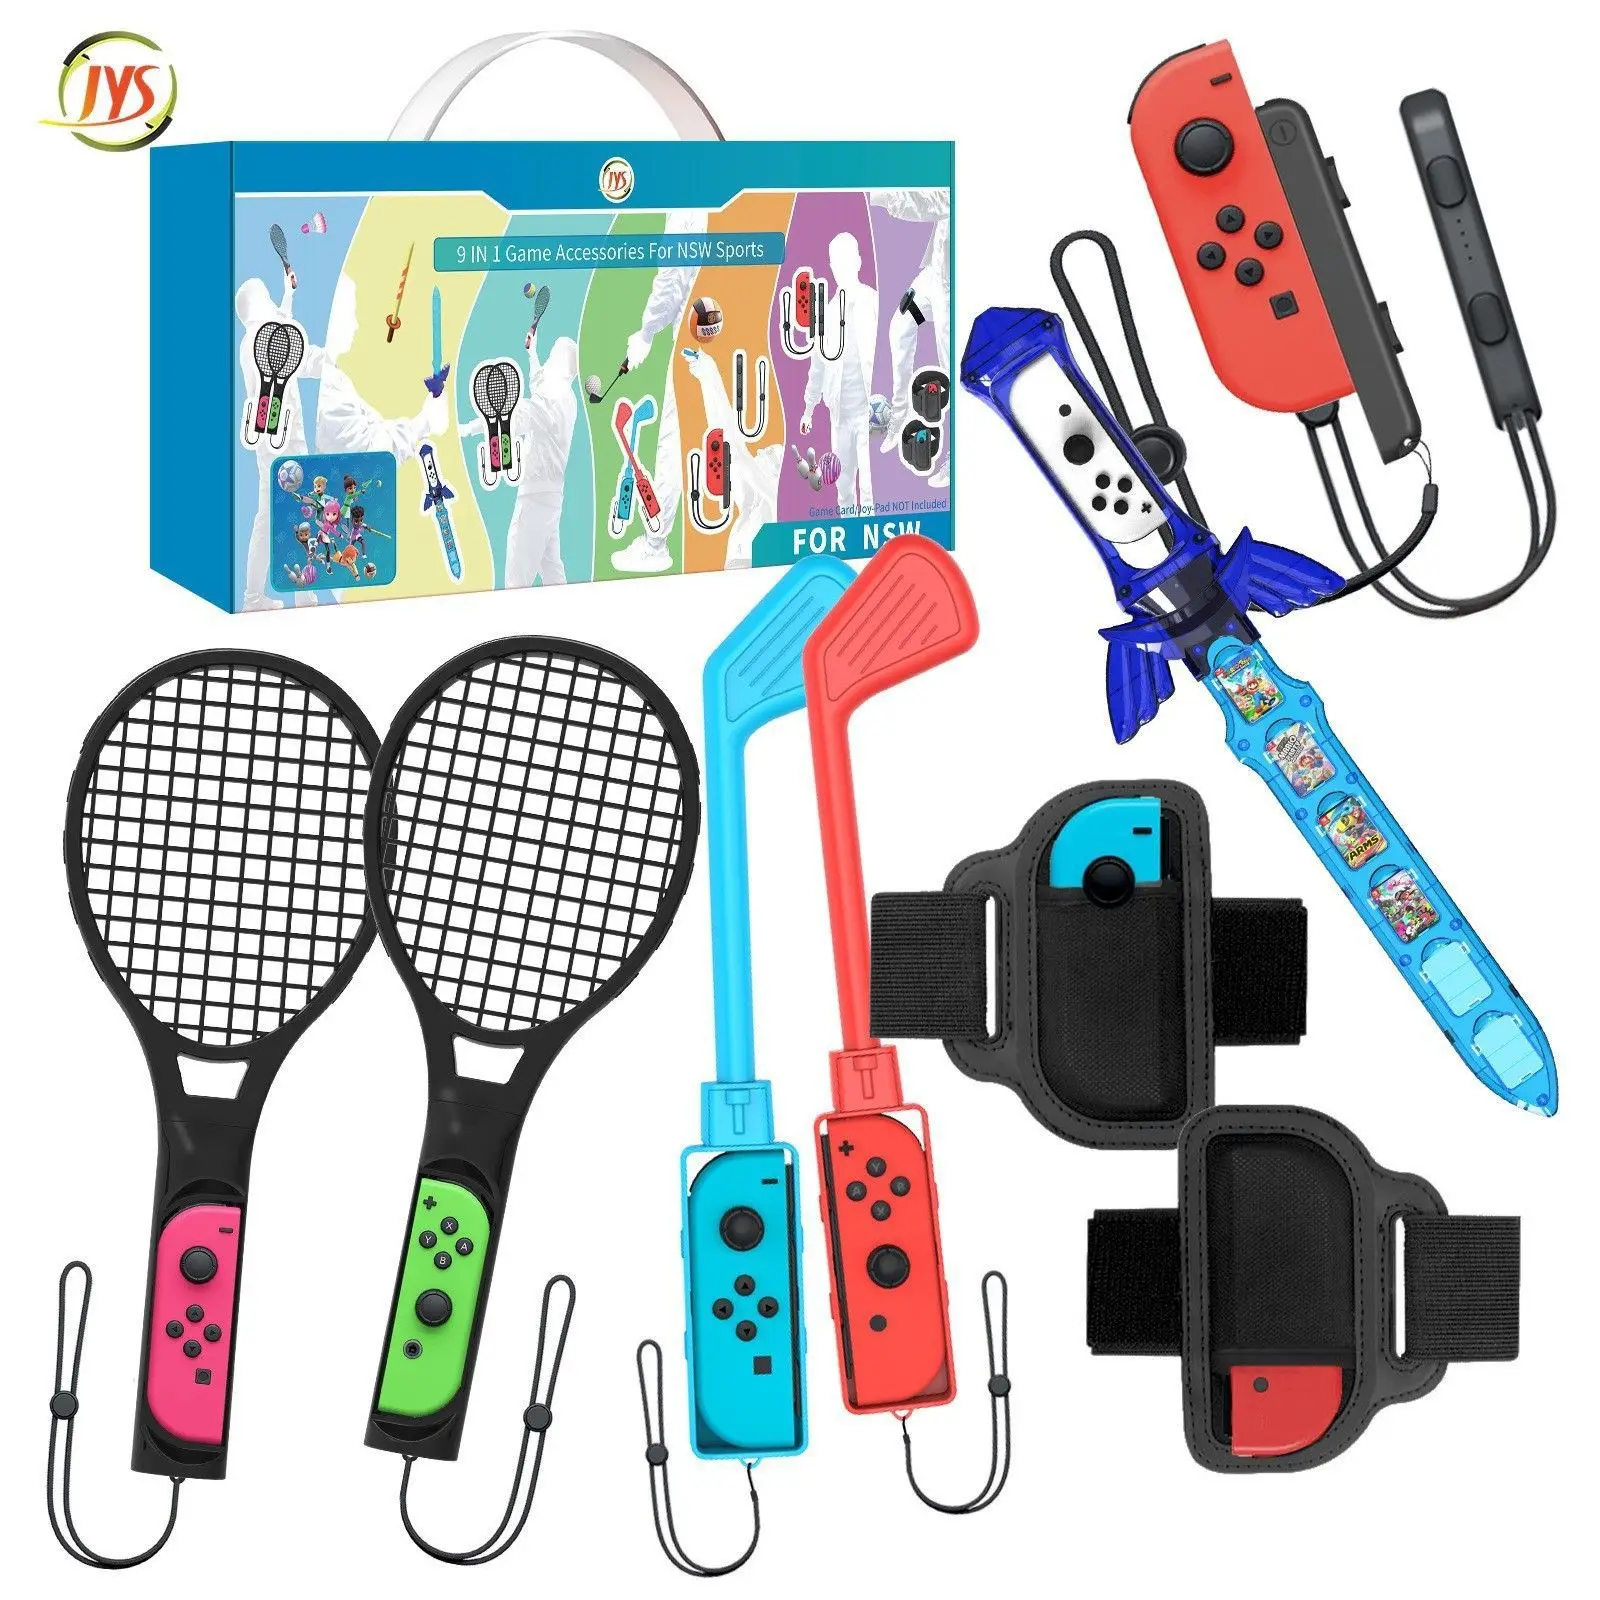 

Hot 9 In 1 For Nintendo Switch Game Accessories Set NS Joycon Controller Handle Grip Dance wristband Golf clubs Joystick Kit